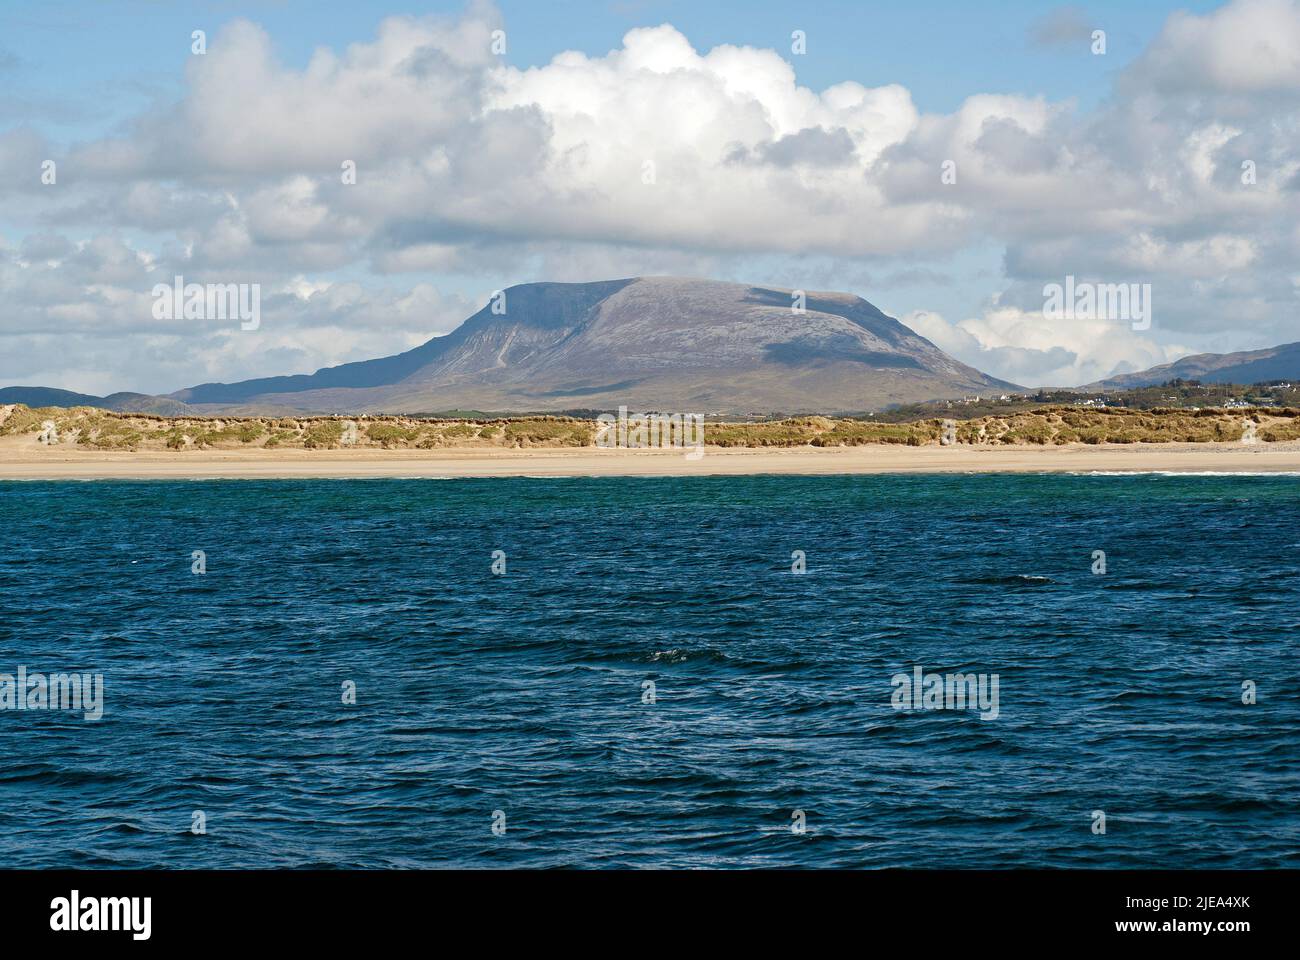 Mount Muckish (Derryveagh Mountains), County Donegal, Irland Stockfoto